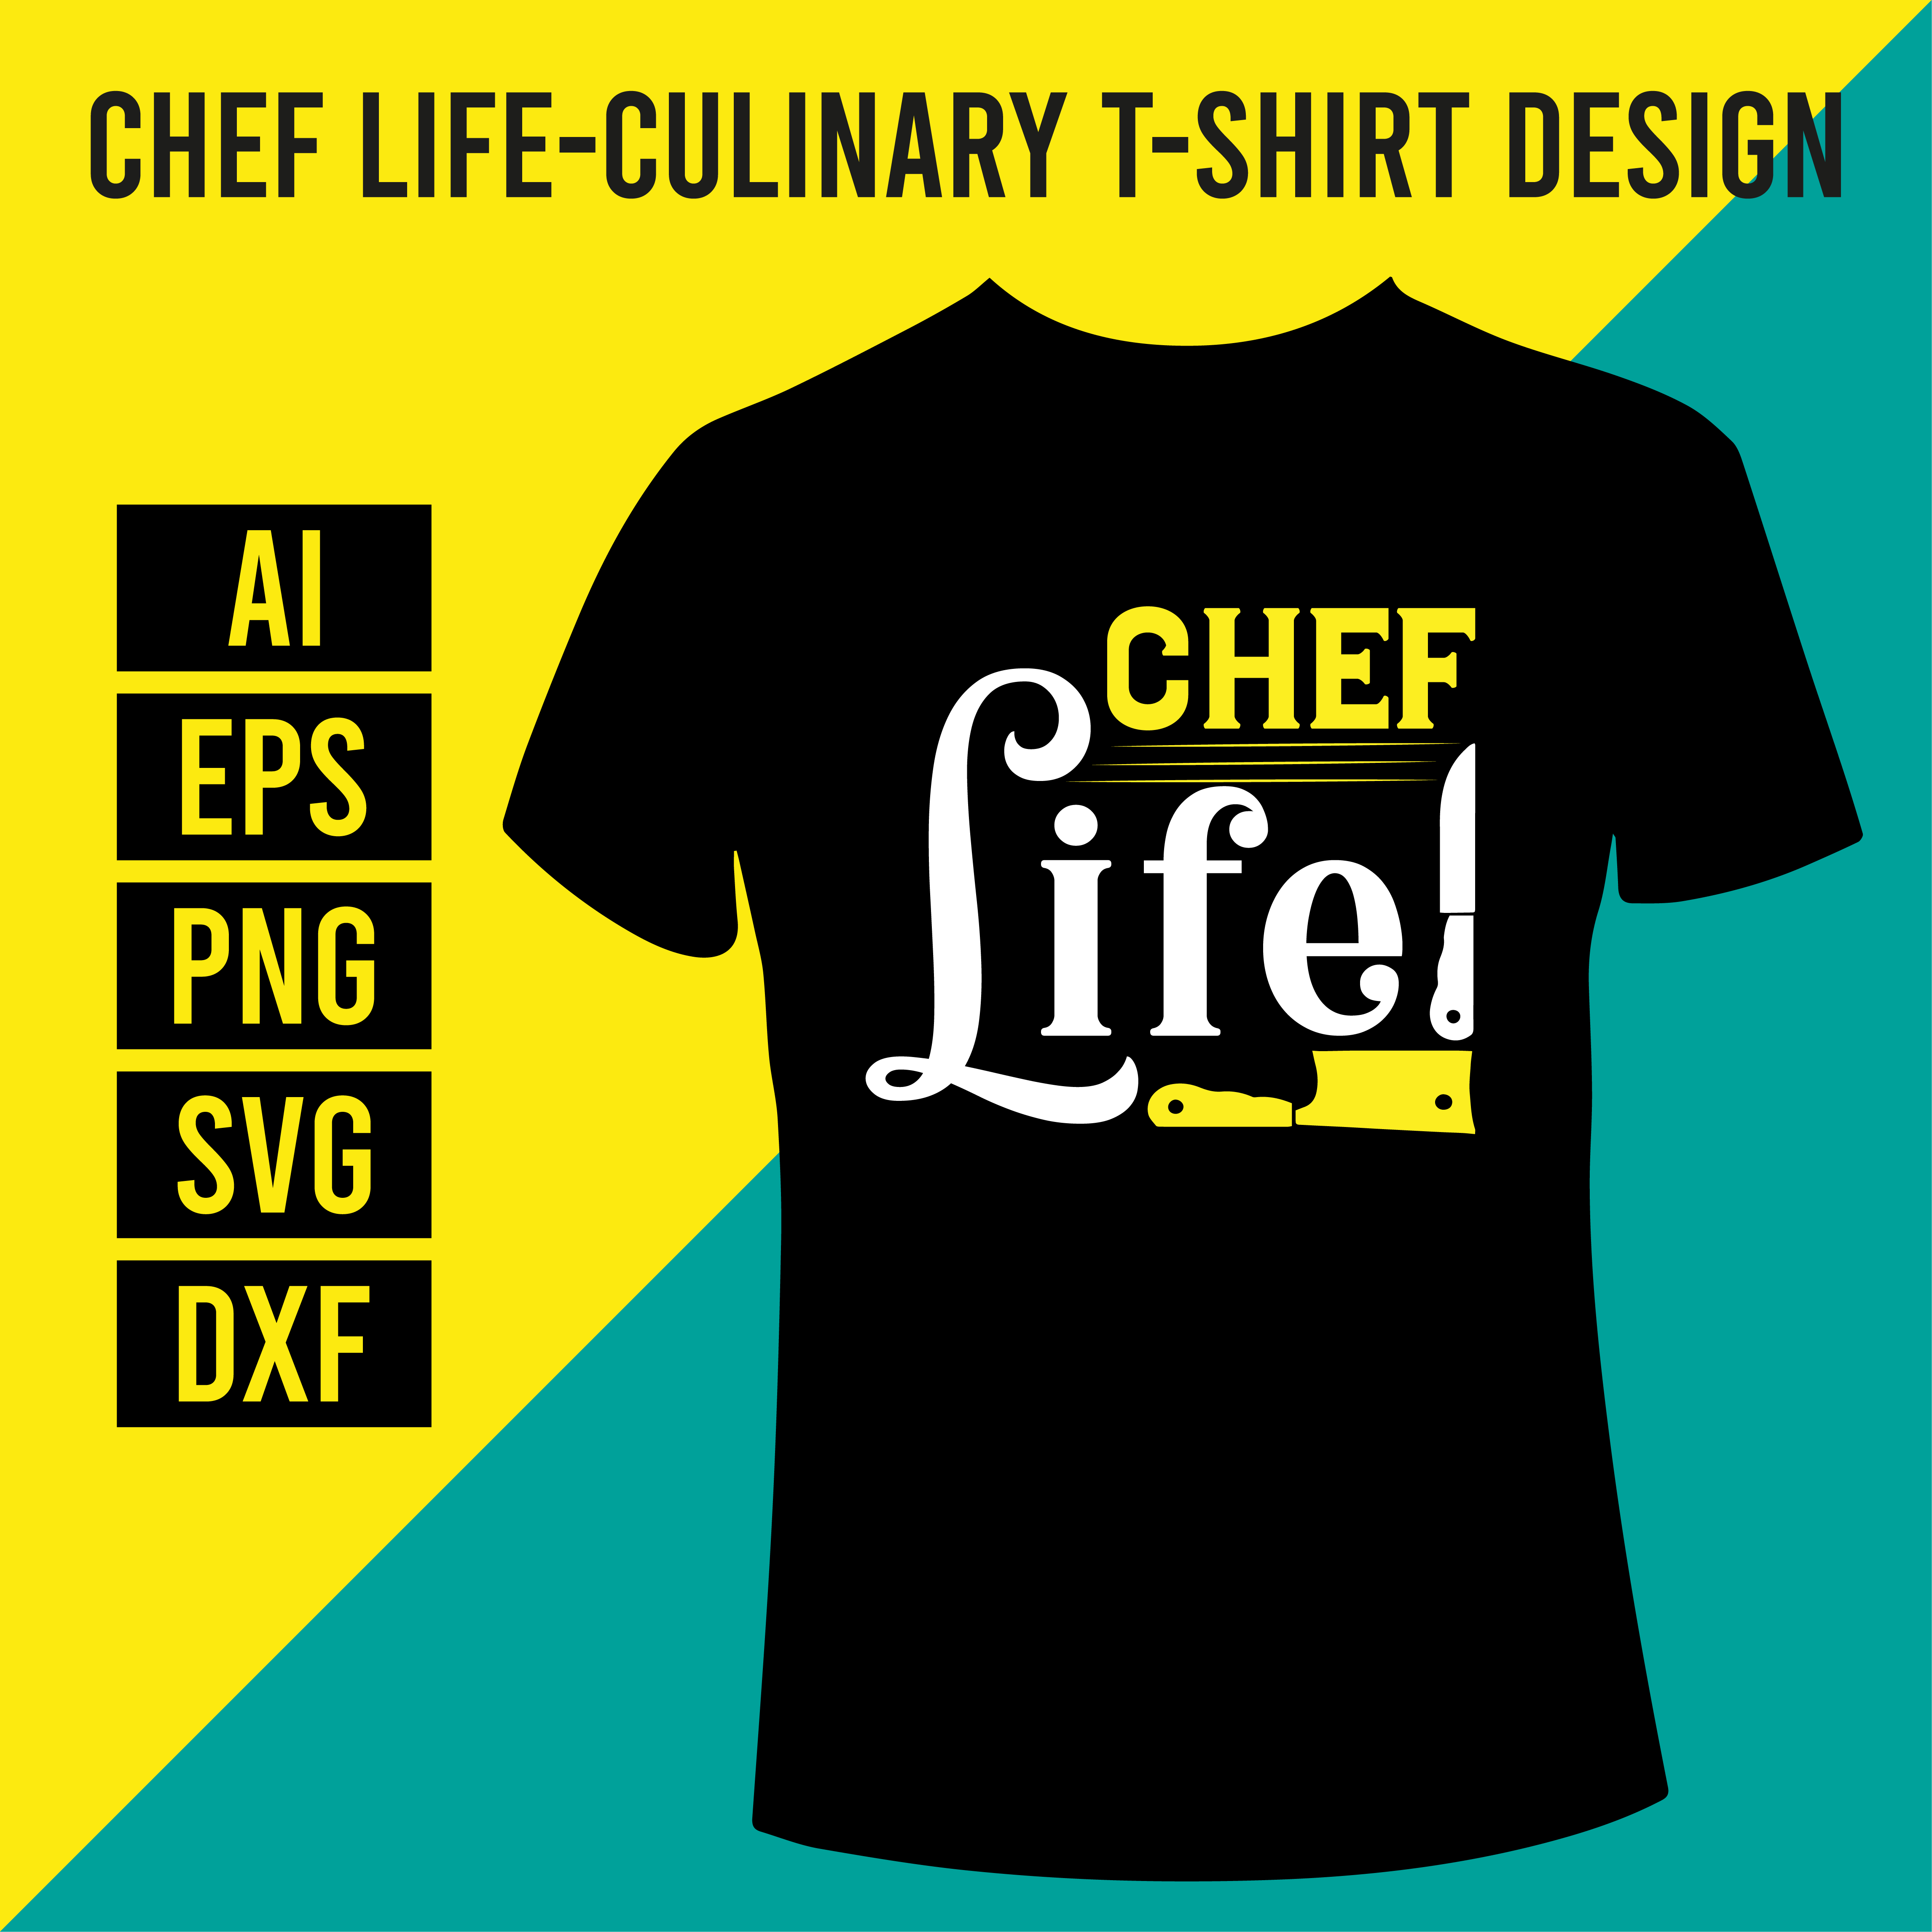 Chef Life - Culinary T-Shirt Design cover image.